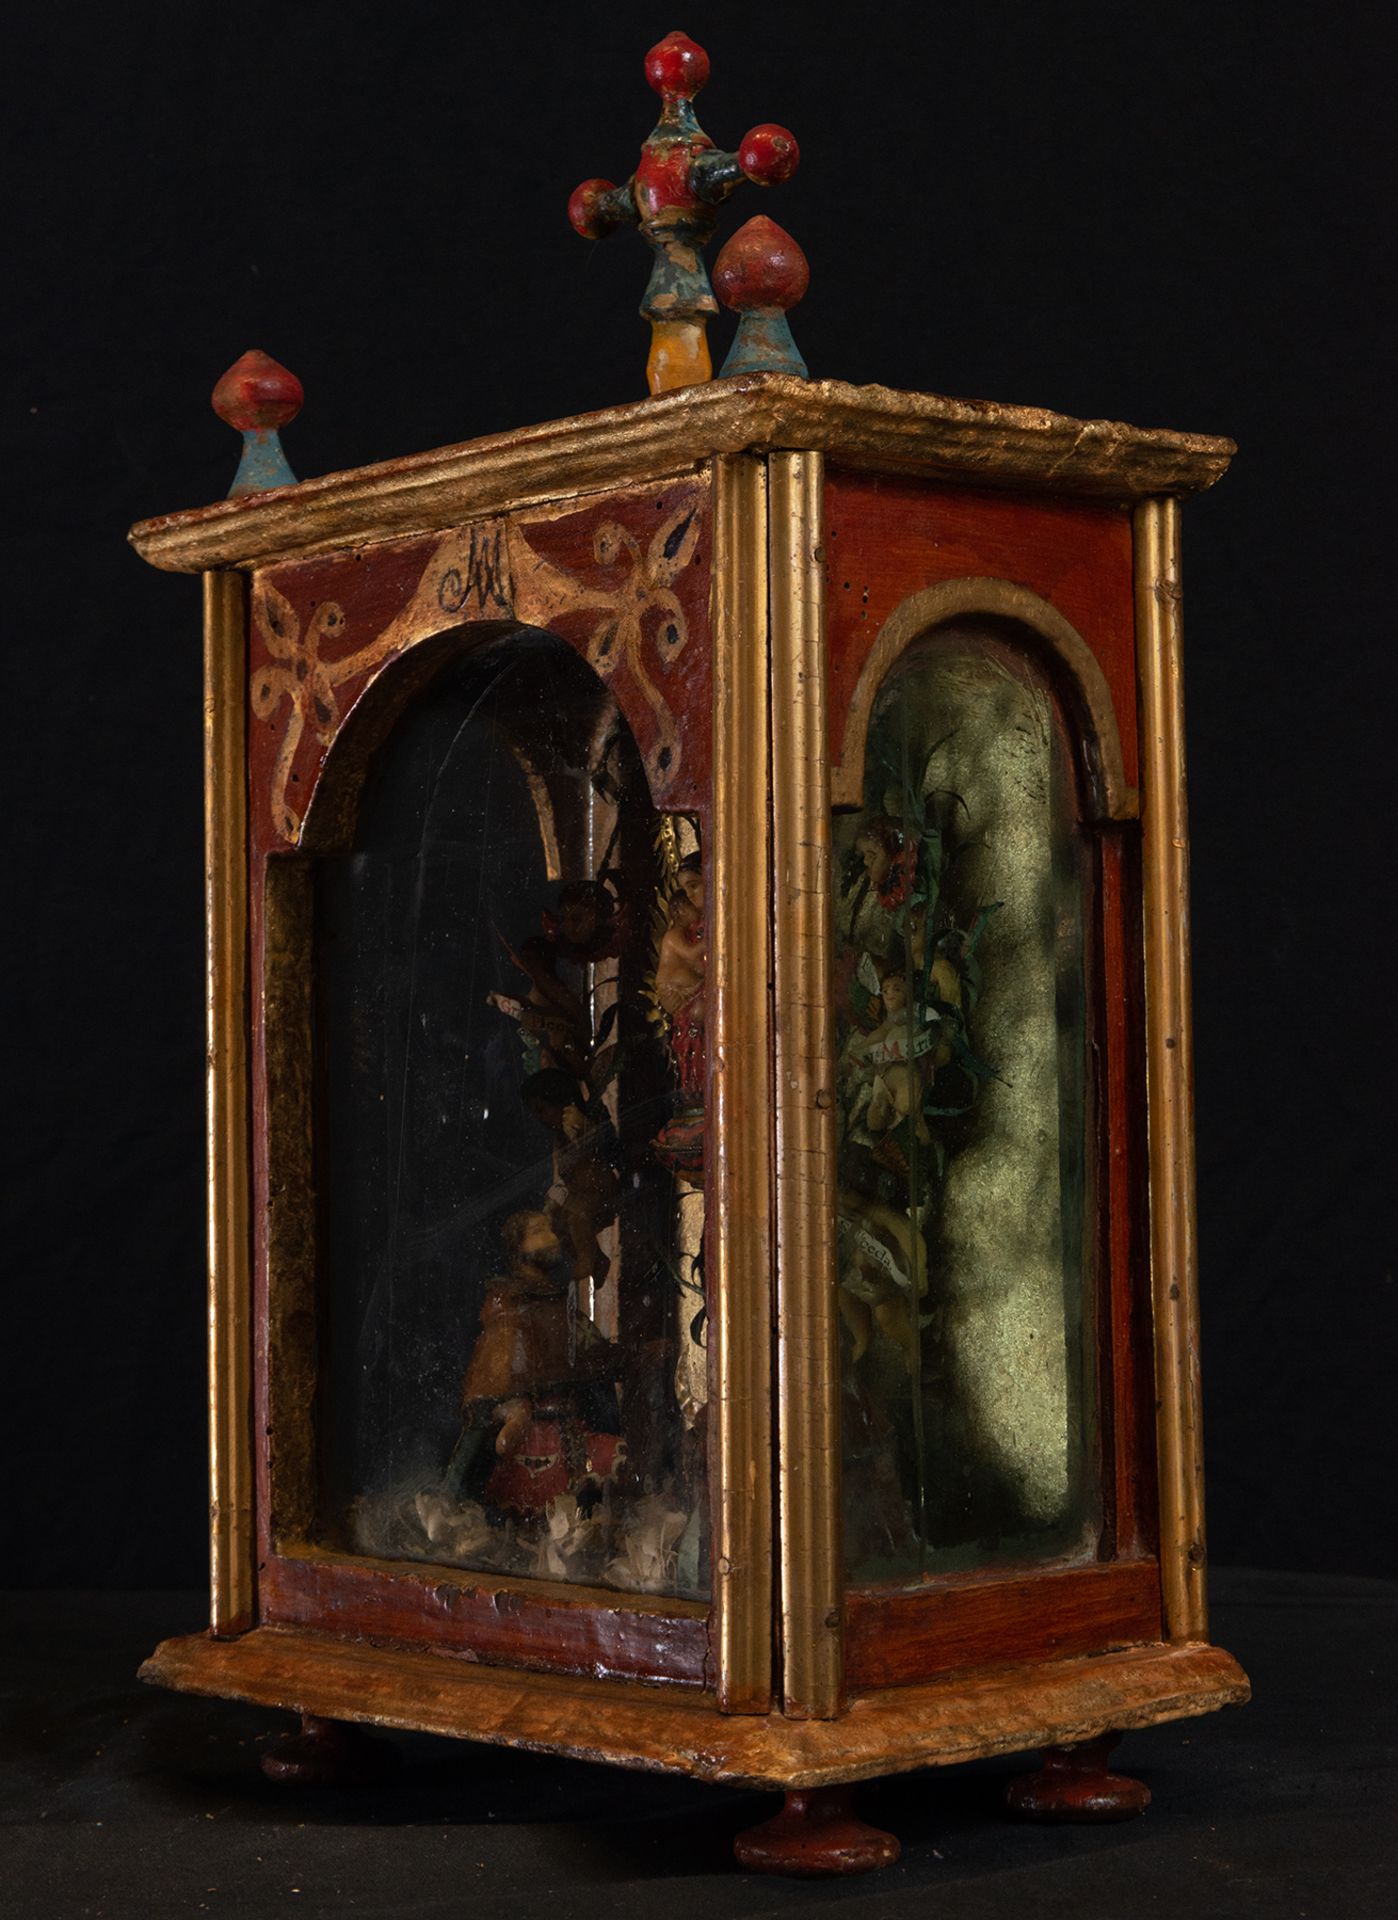 Unusual colonial ensemble of Urn with Virgin of Pilar and Parsonnages in wax, Mexican colonial work  - Image 4 of 6